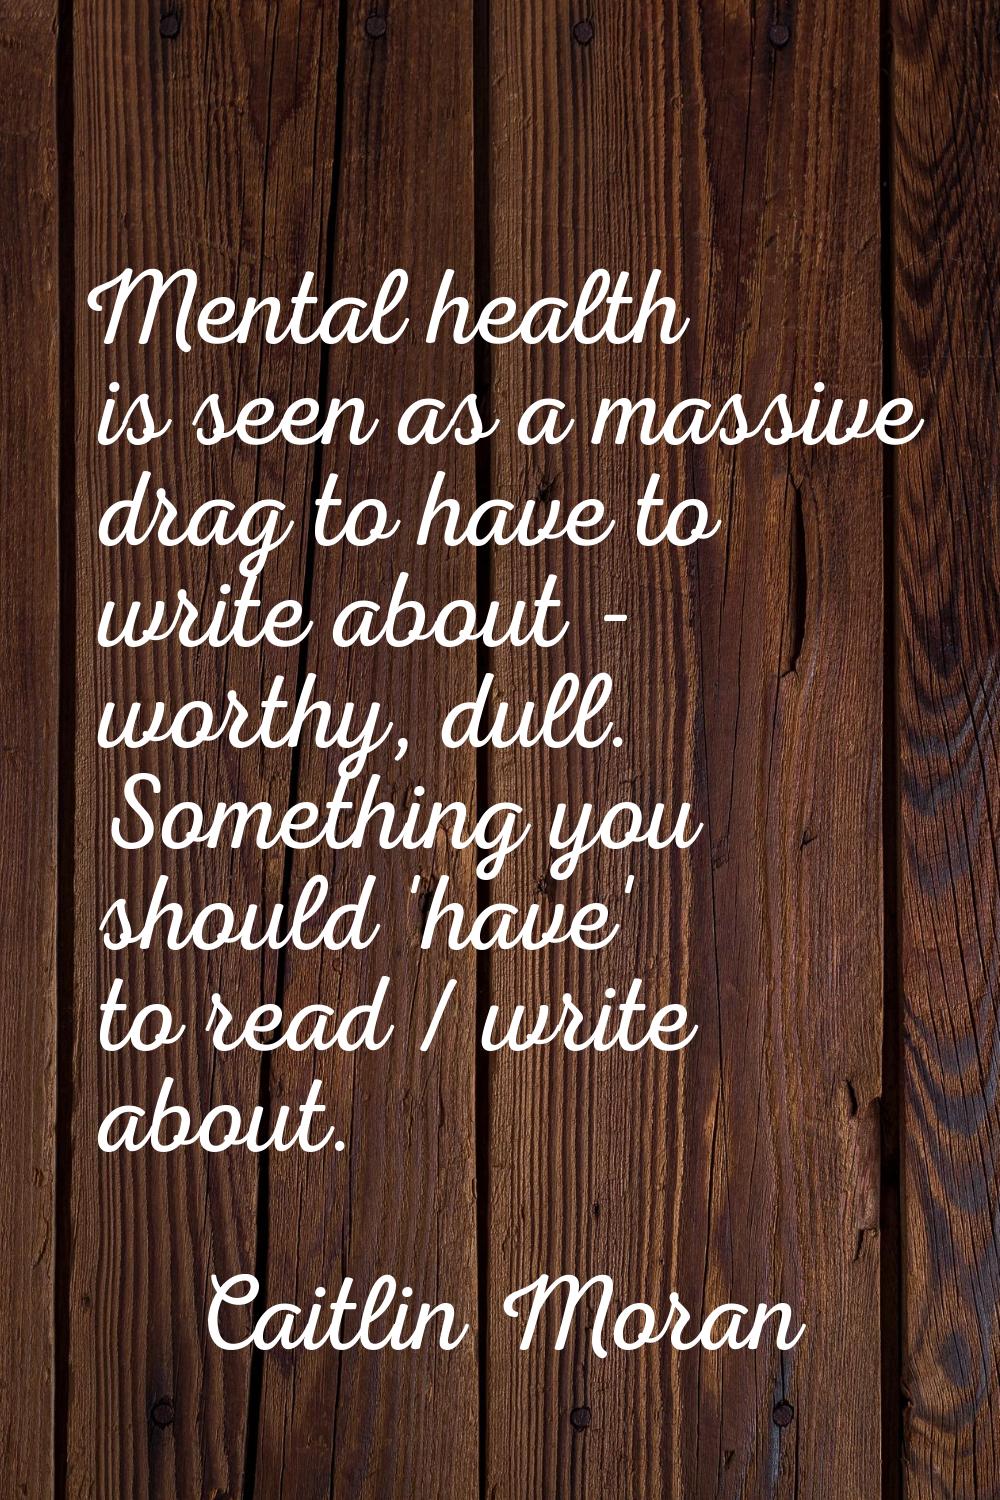 Mental health is seen as a massive drag to have to write about - worthy, dull. Something you should